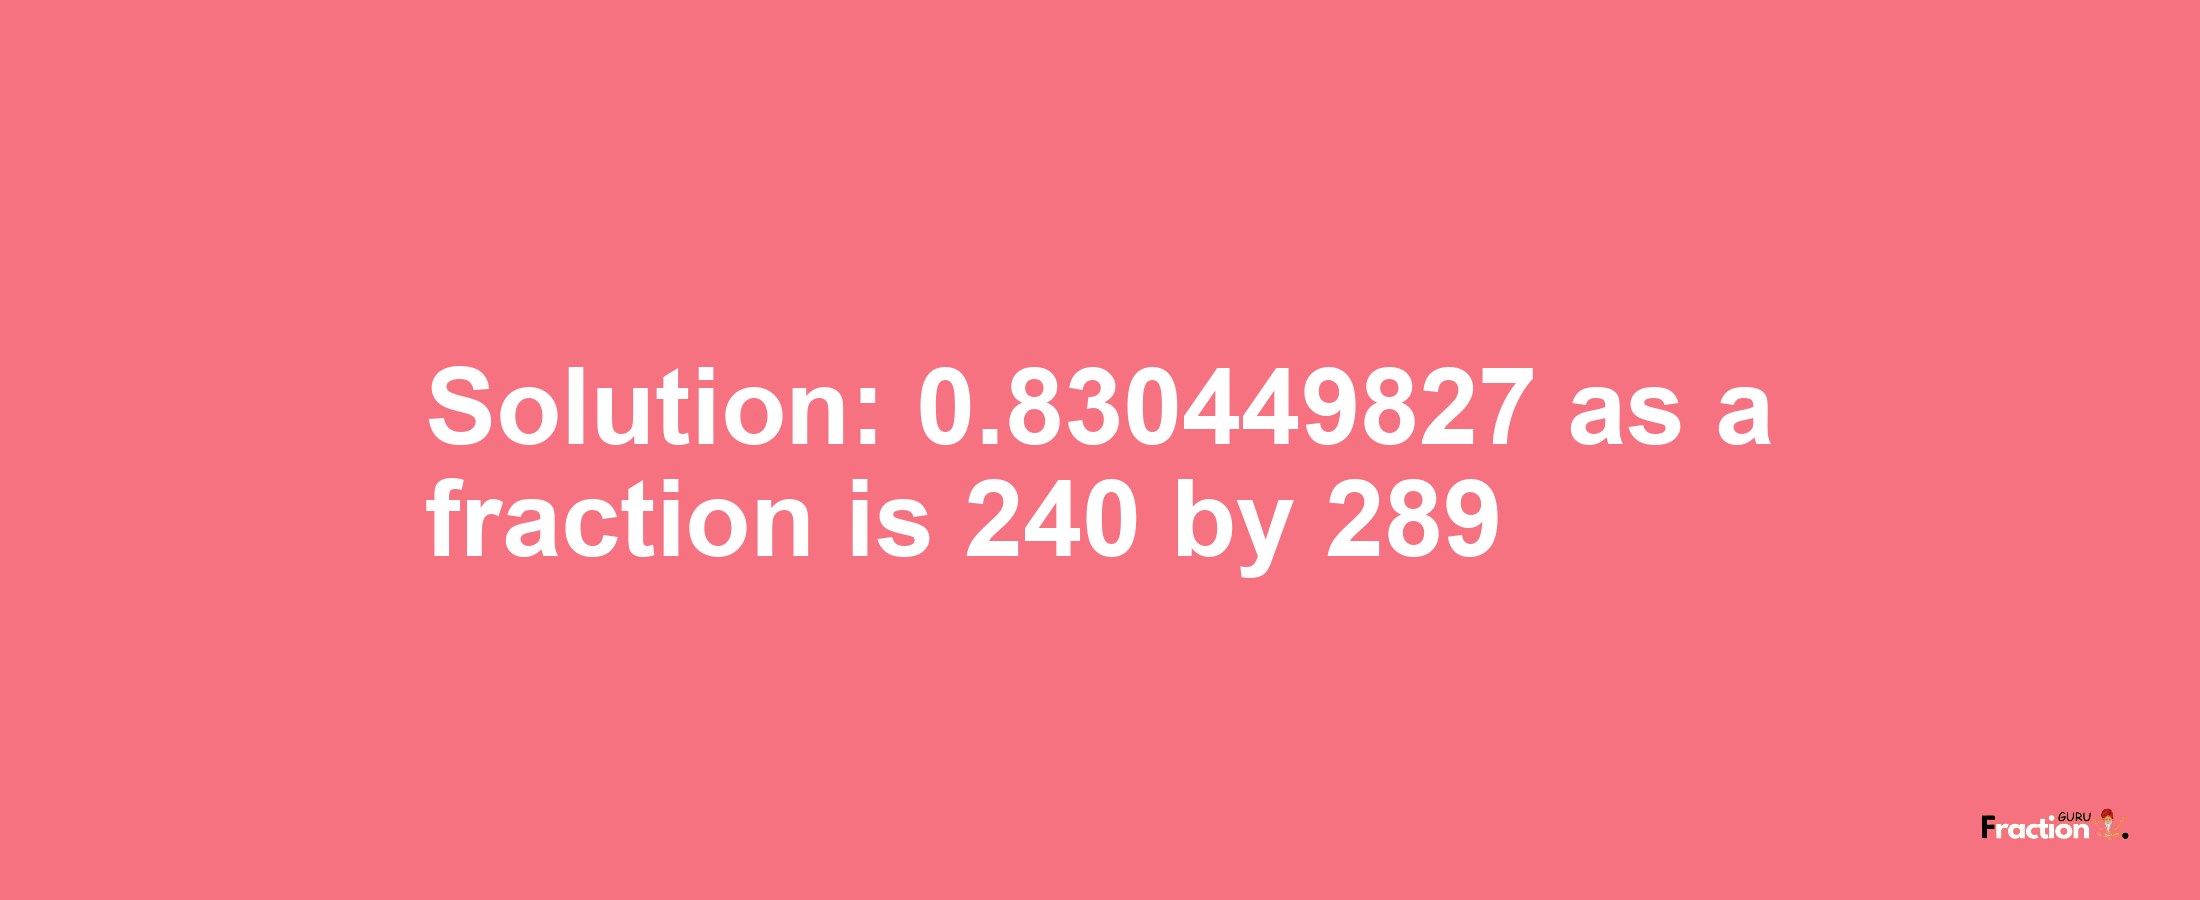 Solution:0.830449827 as a fraction is 240/289